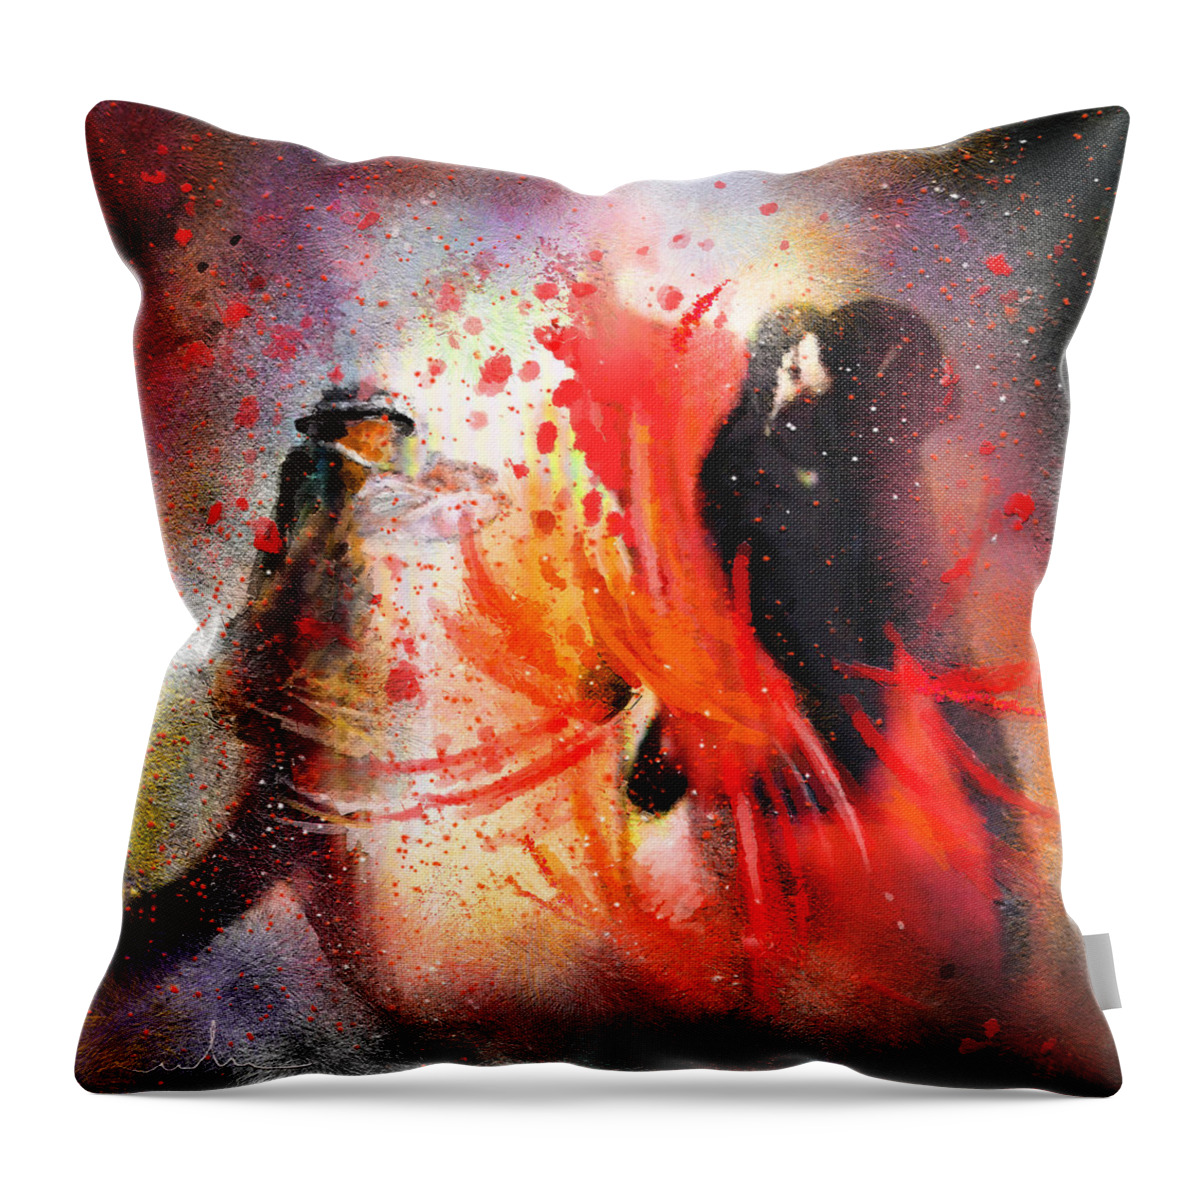 Flamenco Dance Throw Pillow featuring the painting Flamencoscape 07 by Miki De Goodaboom